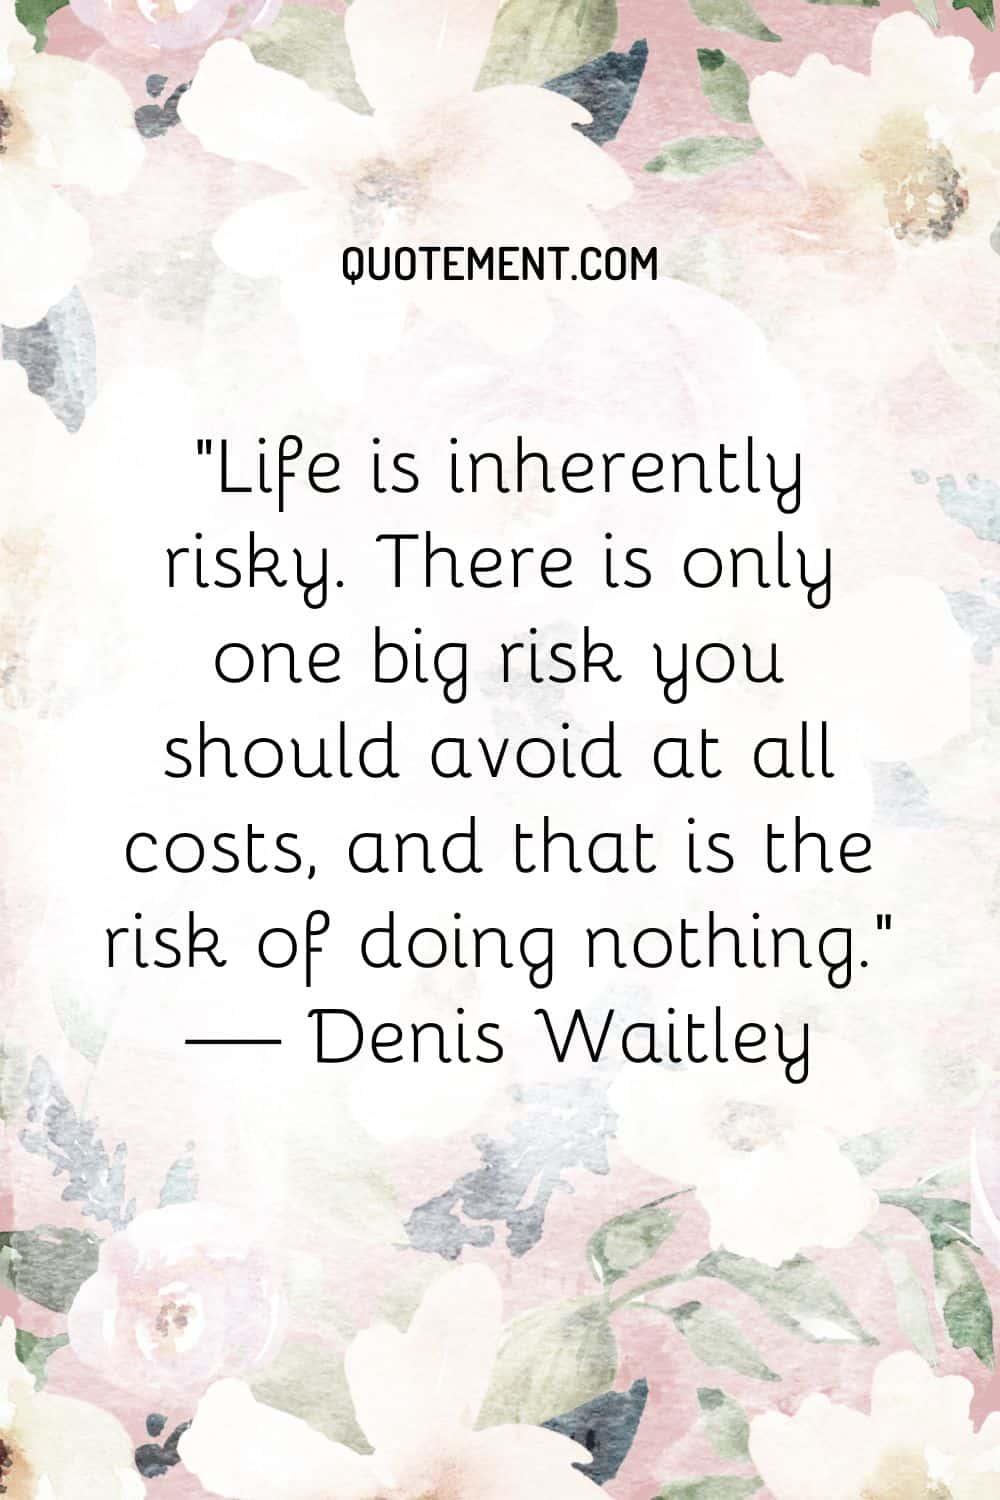 Life is inherently risky. There is only one big risk you should avoid at all costs, and that is the risk of doing nothing